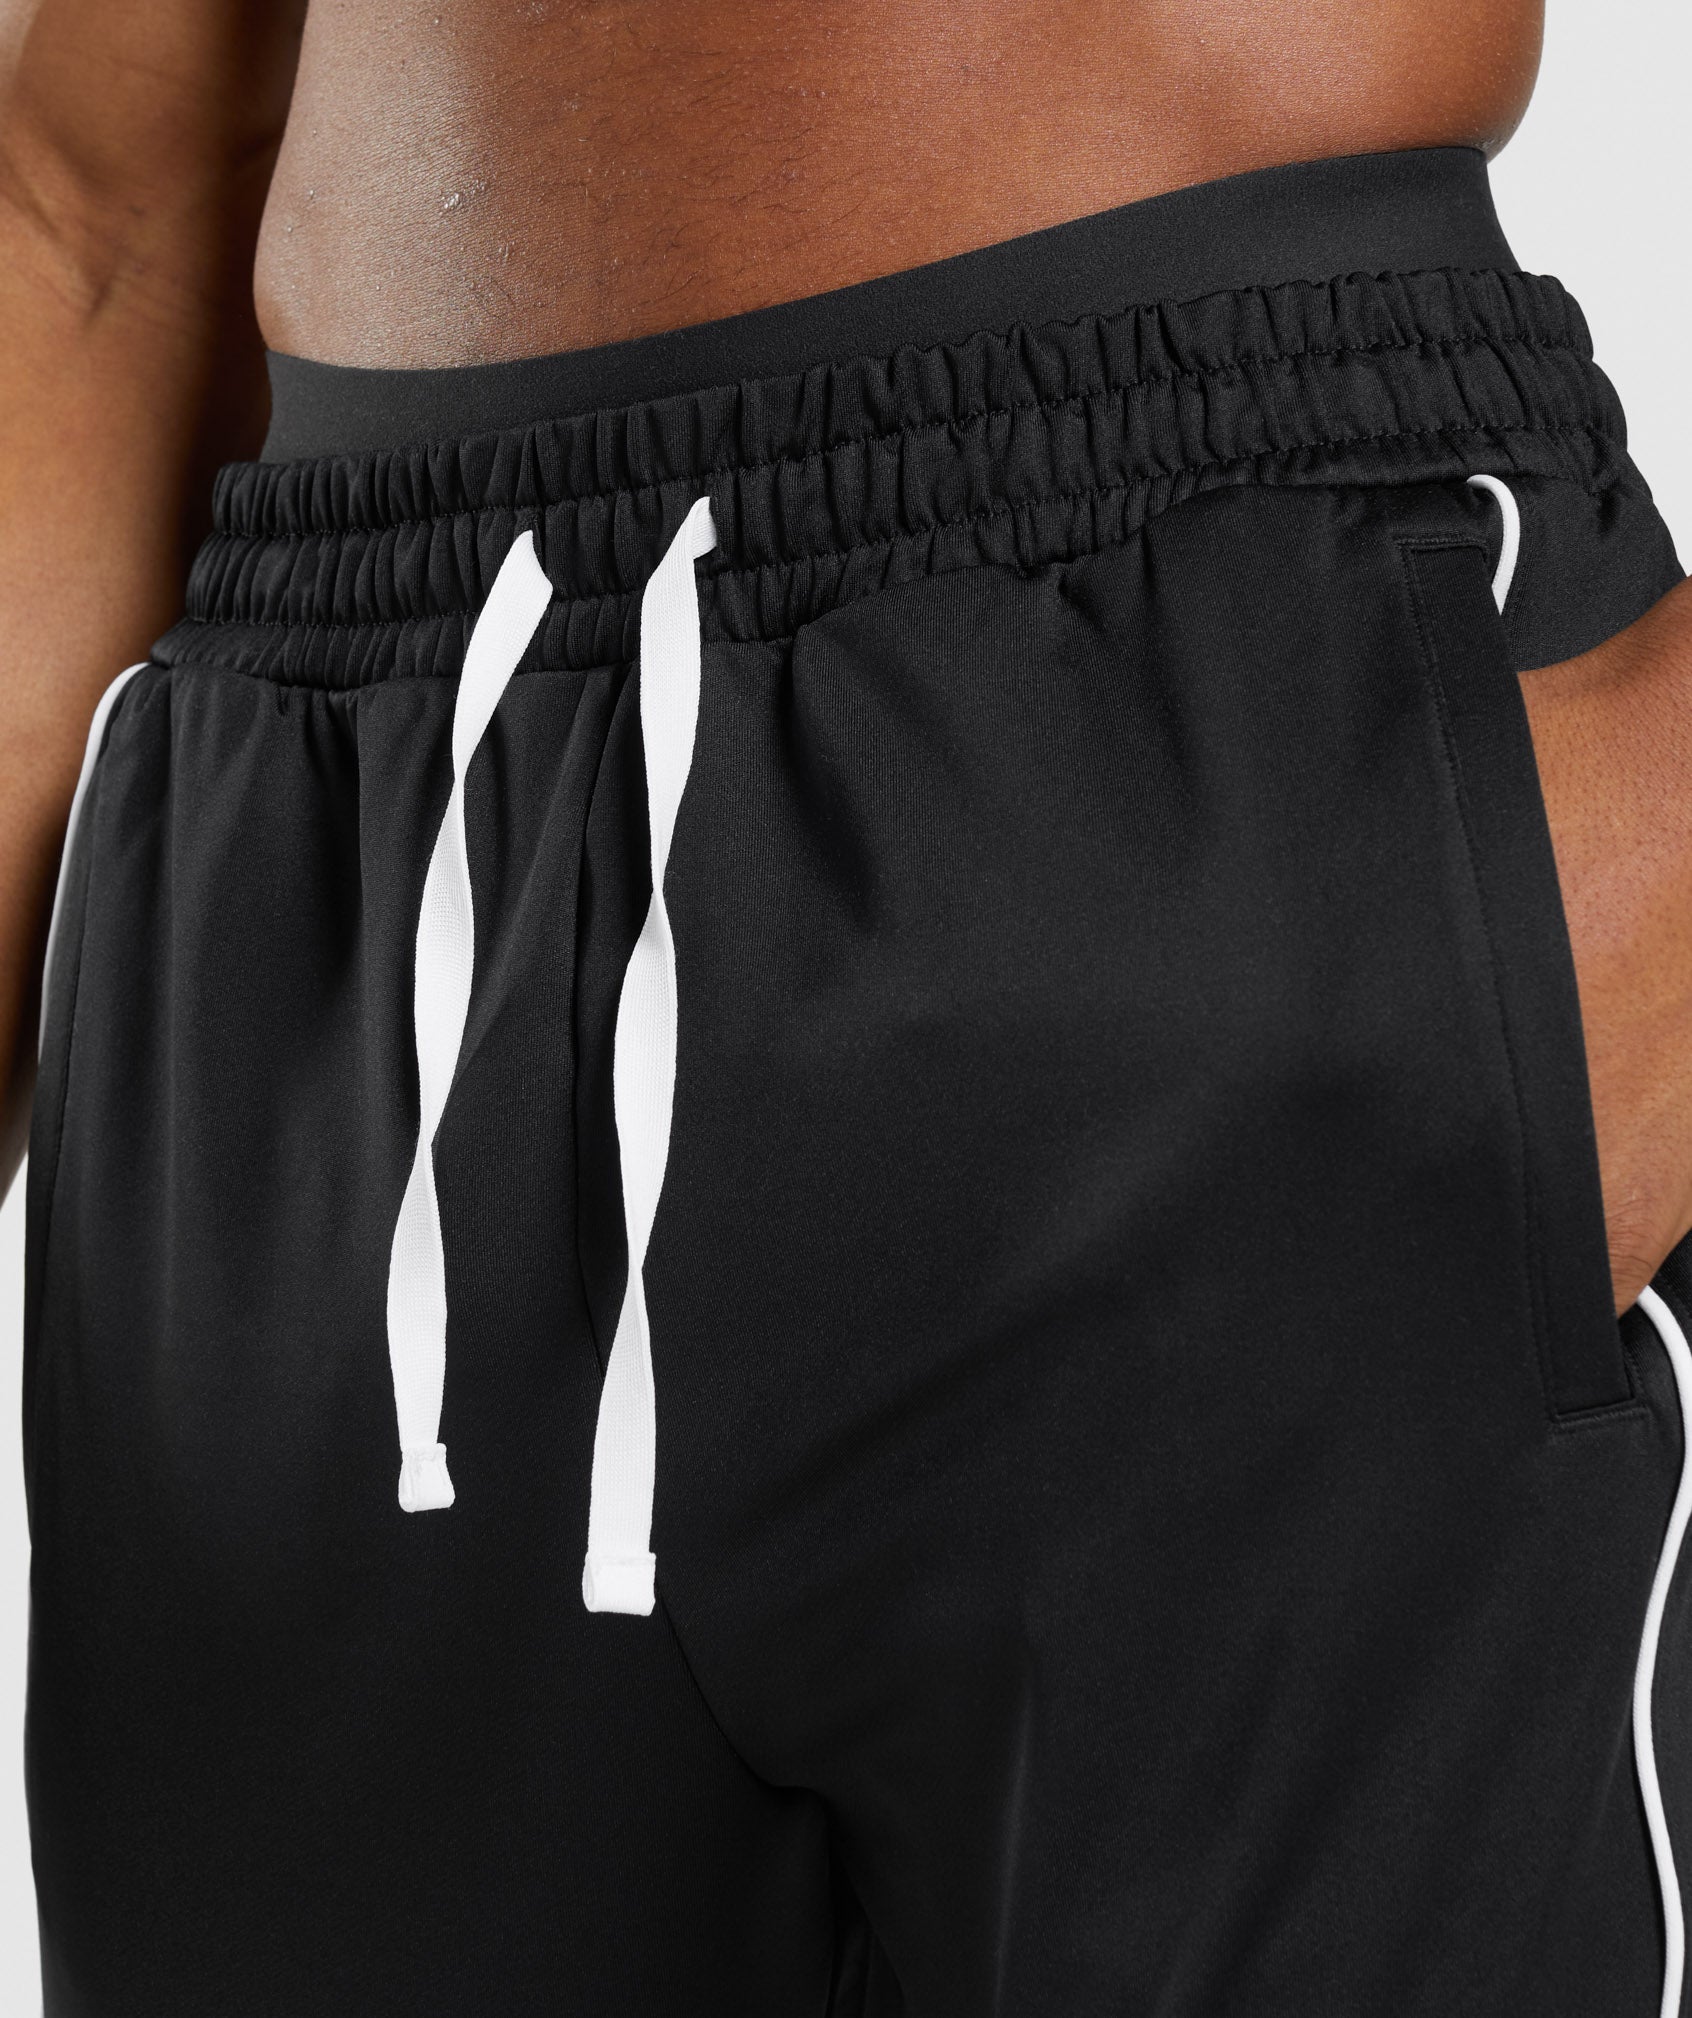 Recess Joggers in Black/White - view 6